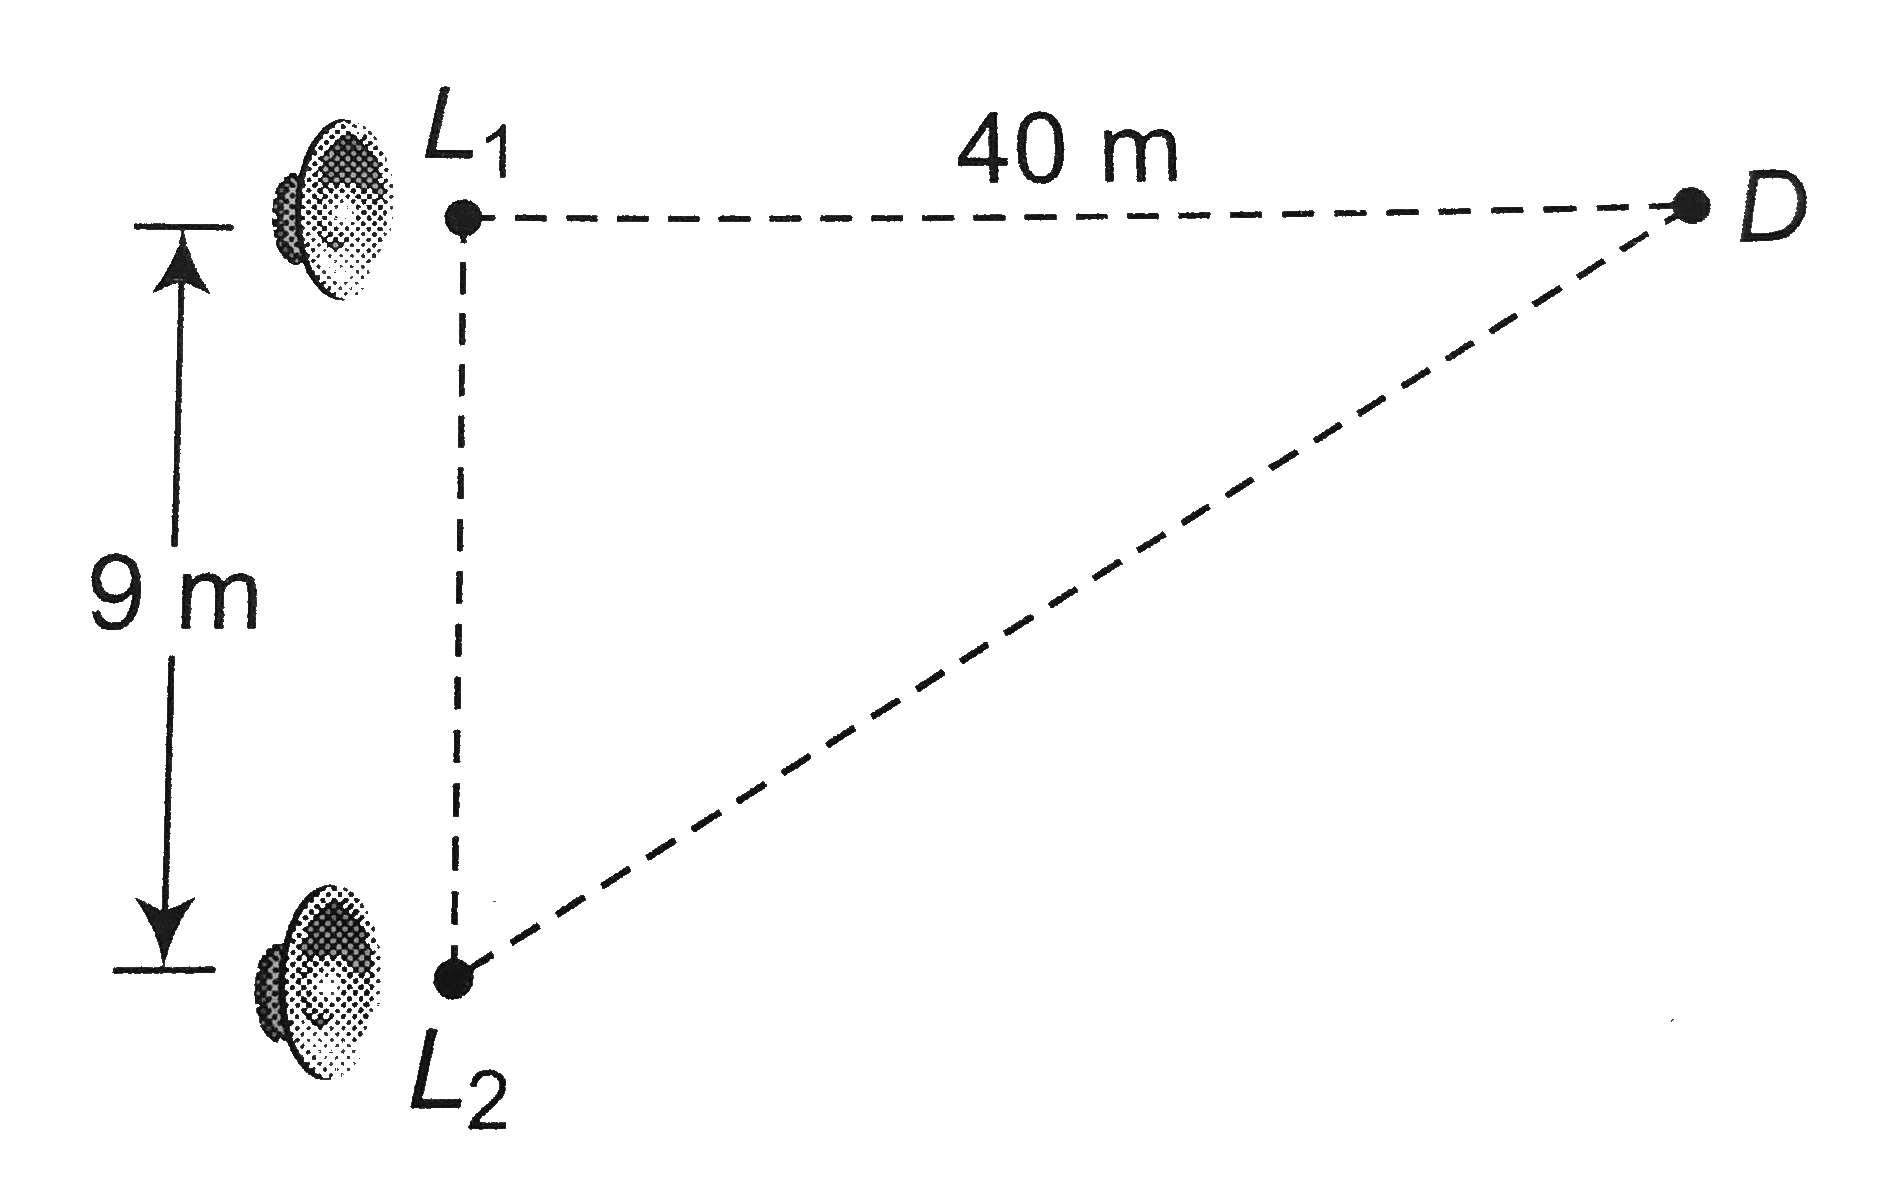 Two loudspeakers L1 and L2 driven by a common oscillator and amplifier, are arranged as shown. The frequency of the oscillator is gradually increased from zero and the detector at D records a series of maxima and minima. If the speed of sound is 330ms^-1 then the frequency at which the first maximum is observed is